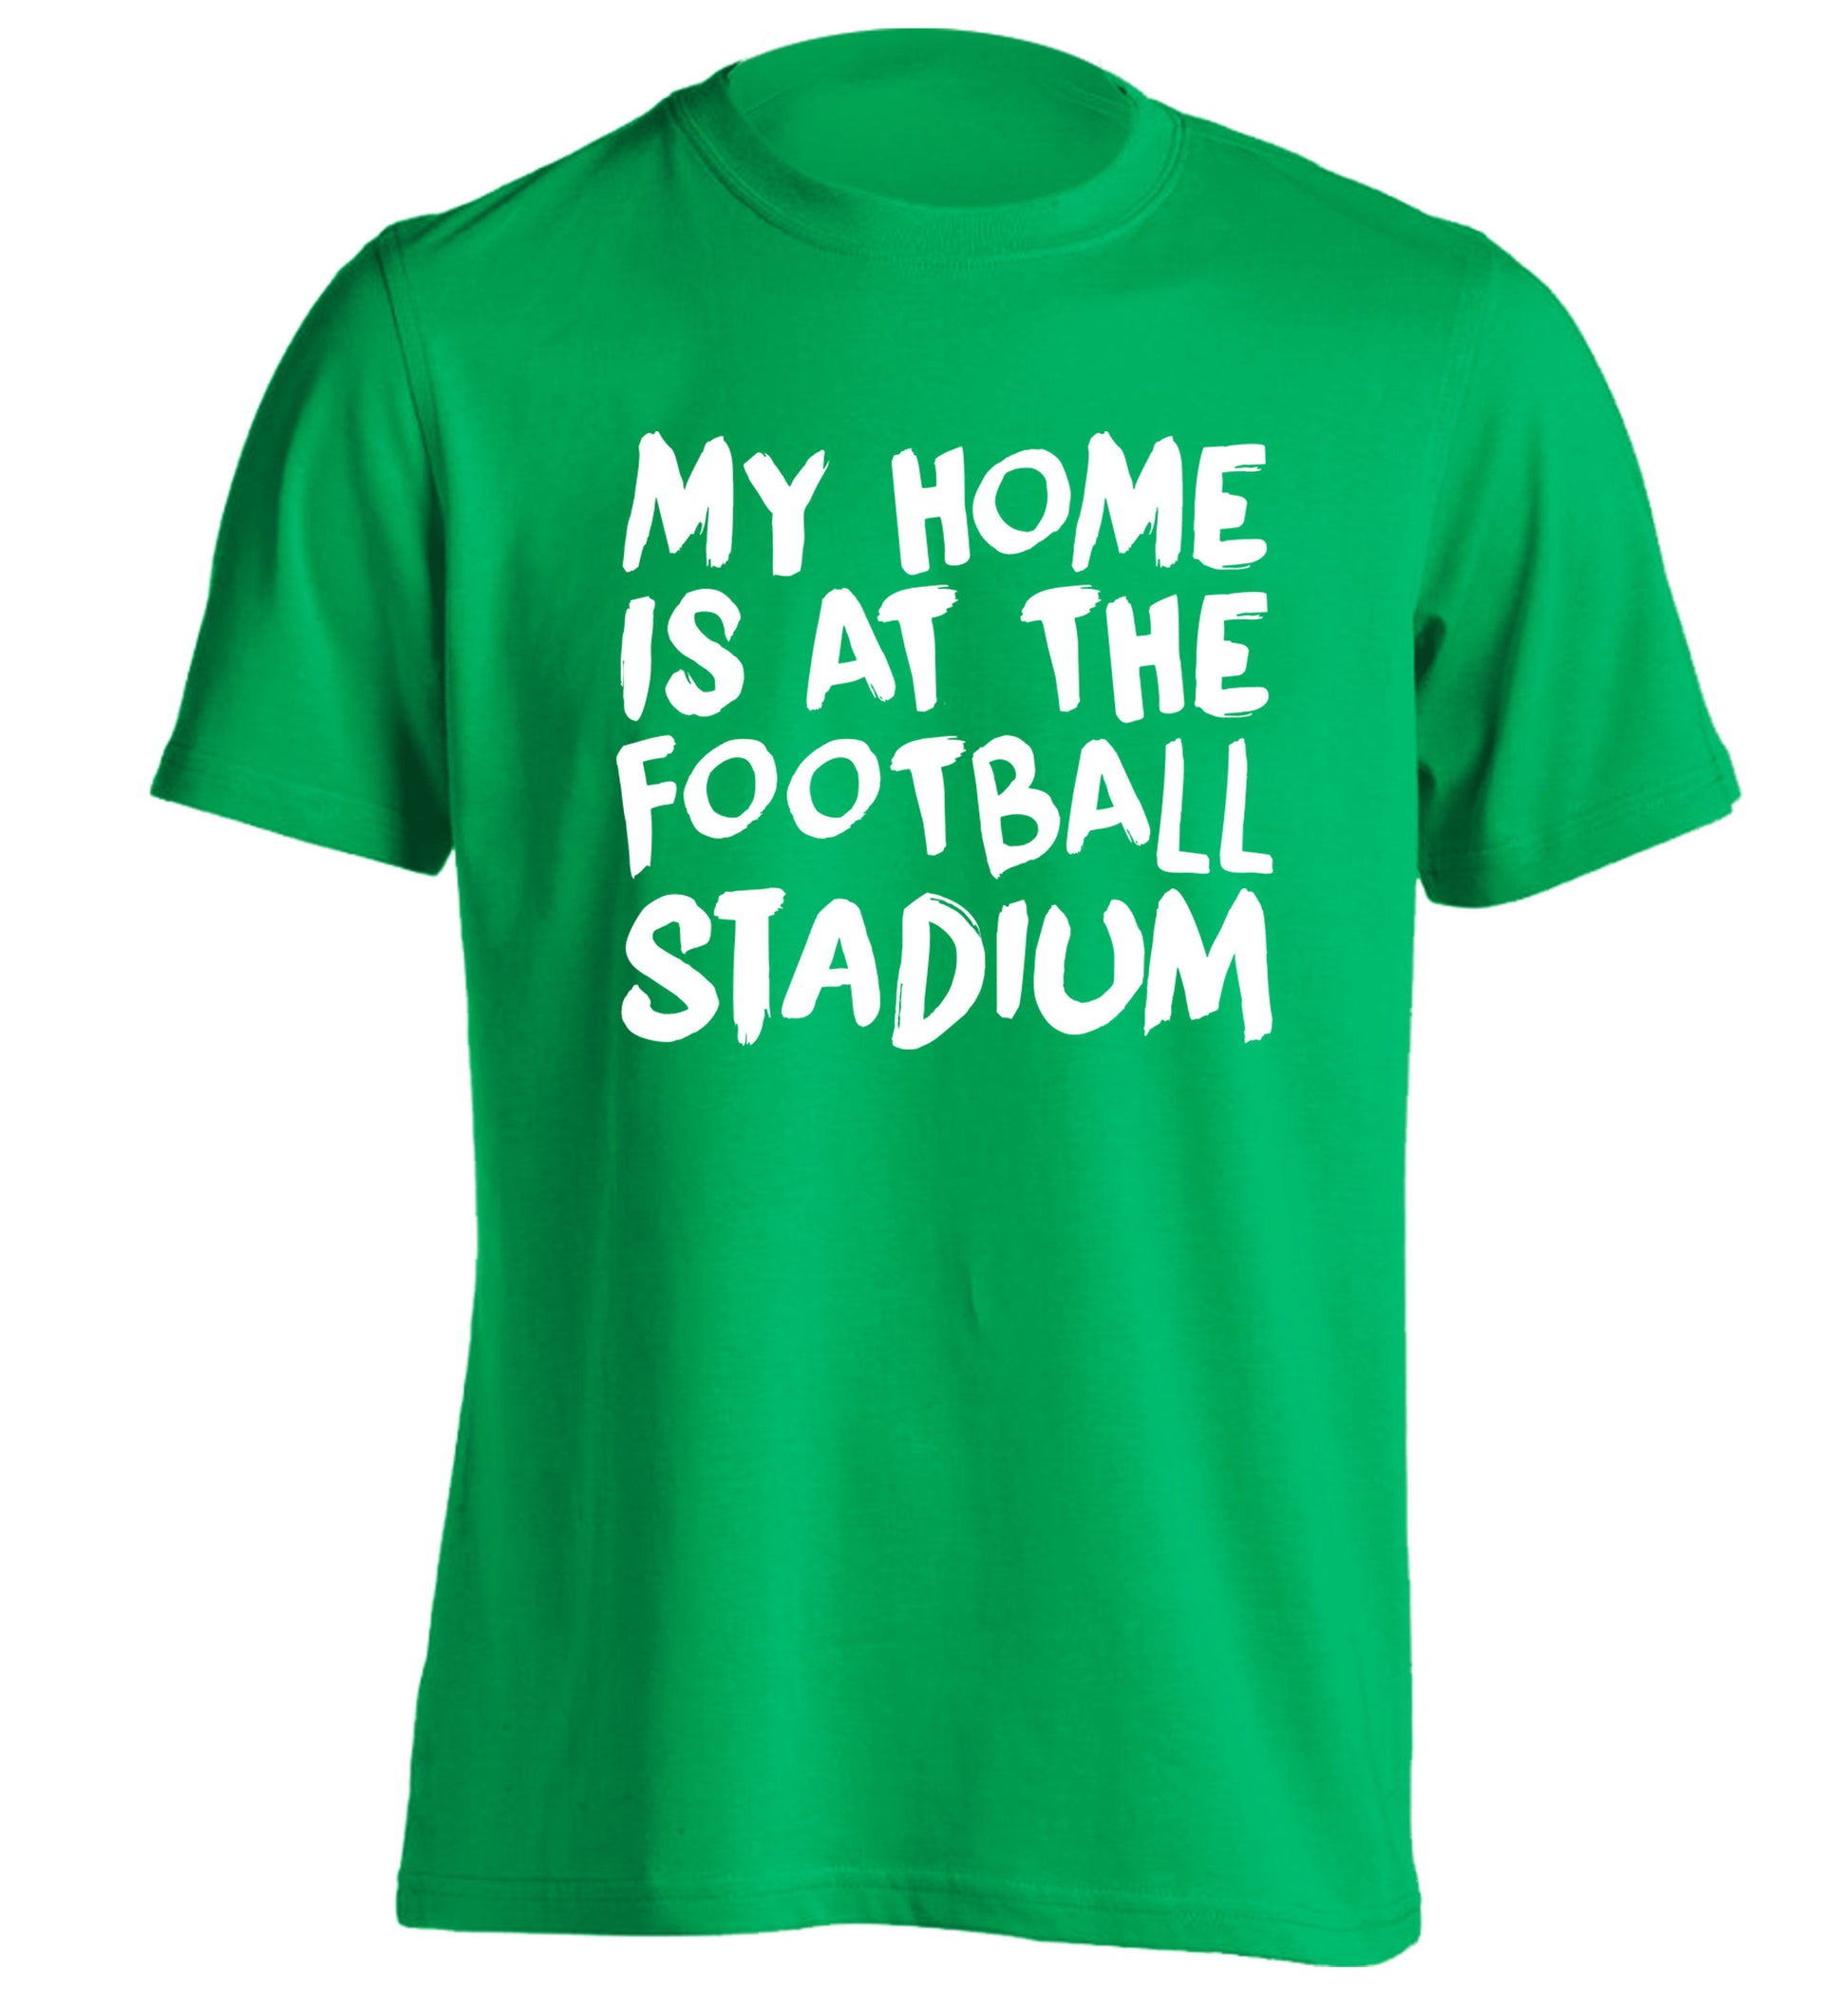 My home is at the football stadium adults unisex green Tshirt 2XL